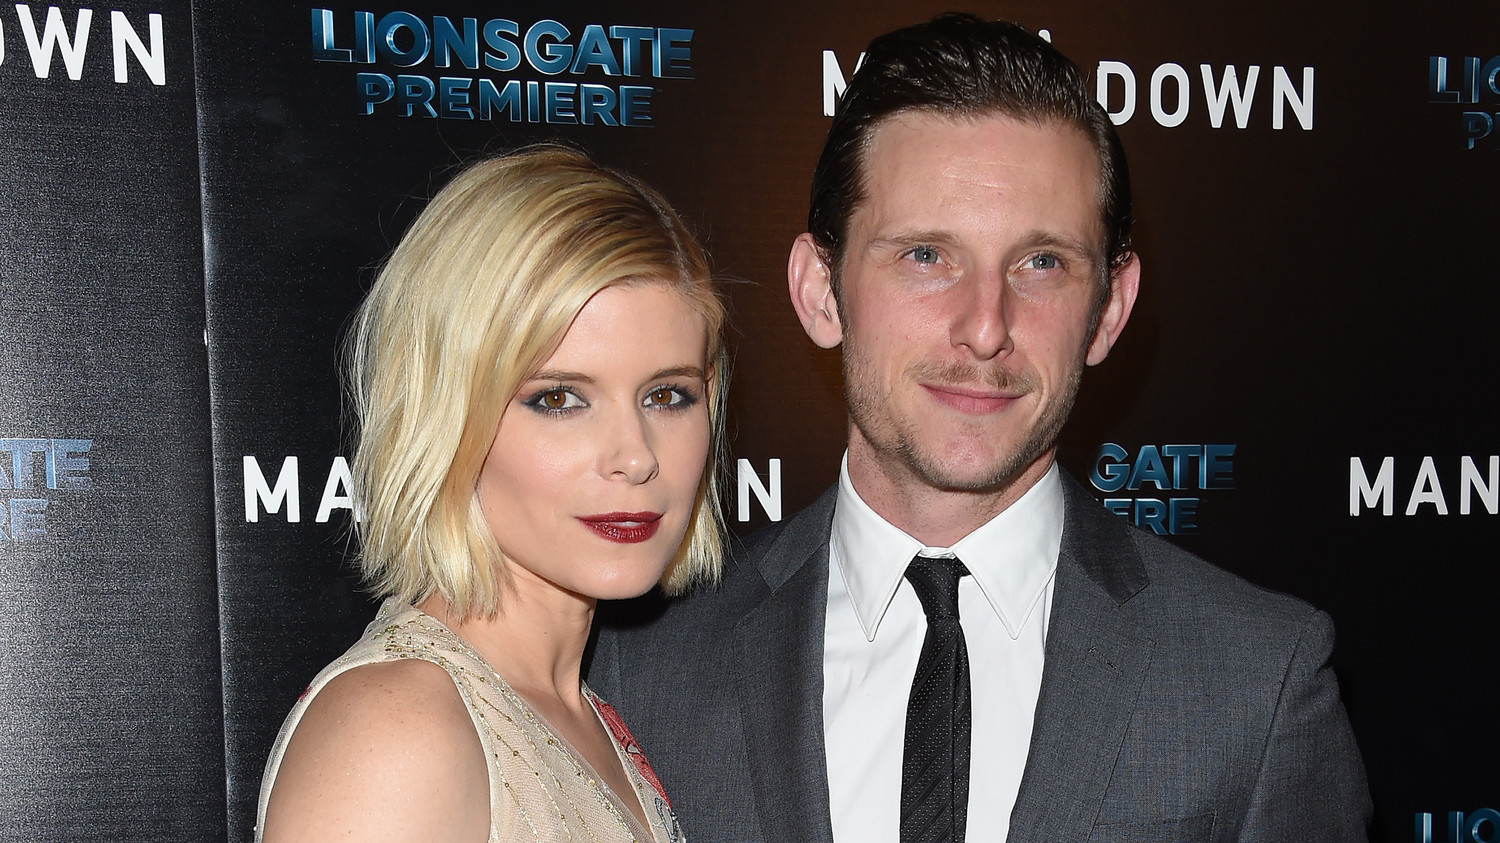 HOLLYWOOD, CA - NOVEMBER 30:  Actors Kate Mara and Jamie Bell attend the premiere of 'Man Down' at ArcLight Hollywood on November 30, 2016 in Hollywood, California.  (Photo by Axelle/Bauer-Griffin/FilmMagic)